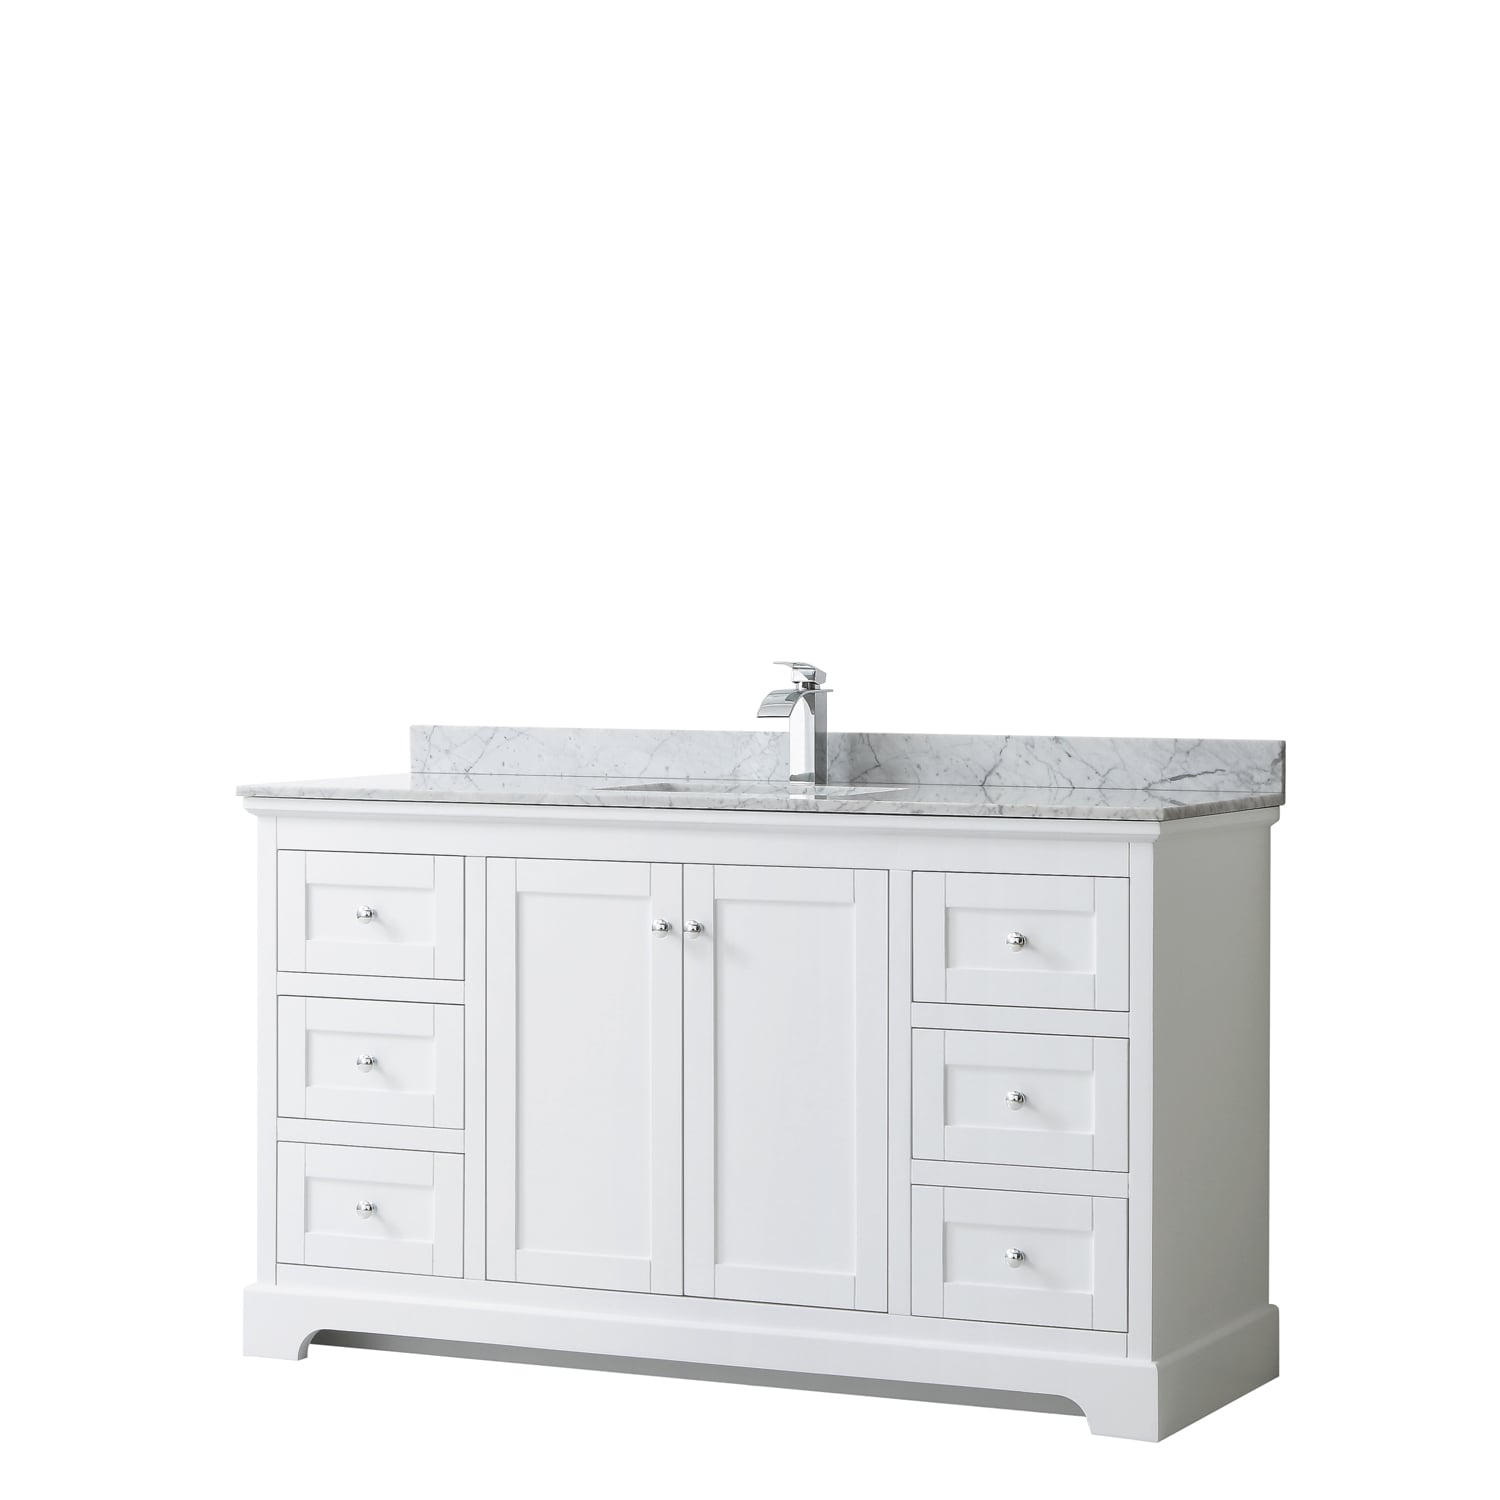 Miniyam 22 inch Bathroom Vanity Sink Combo for Small Space, Wall Mounted Cabinet Set, White, Size: 22 inch x 13 inch